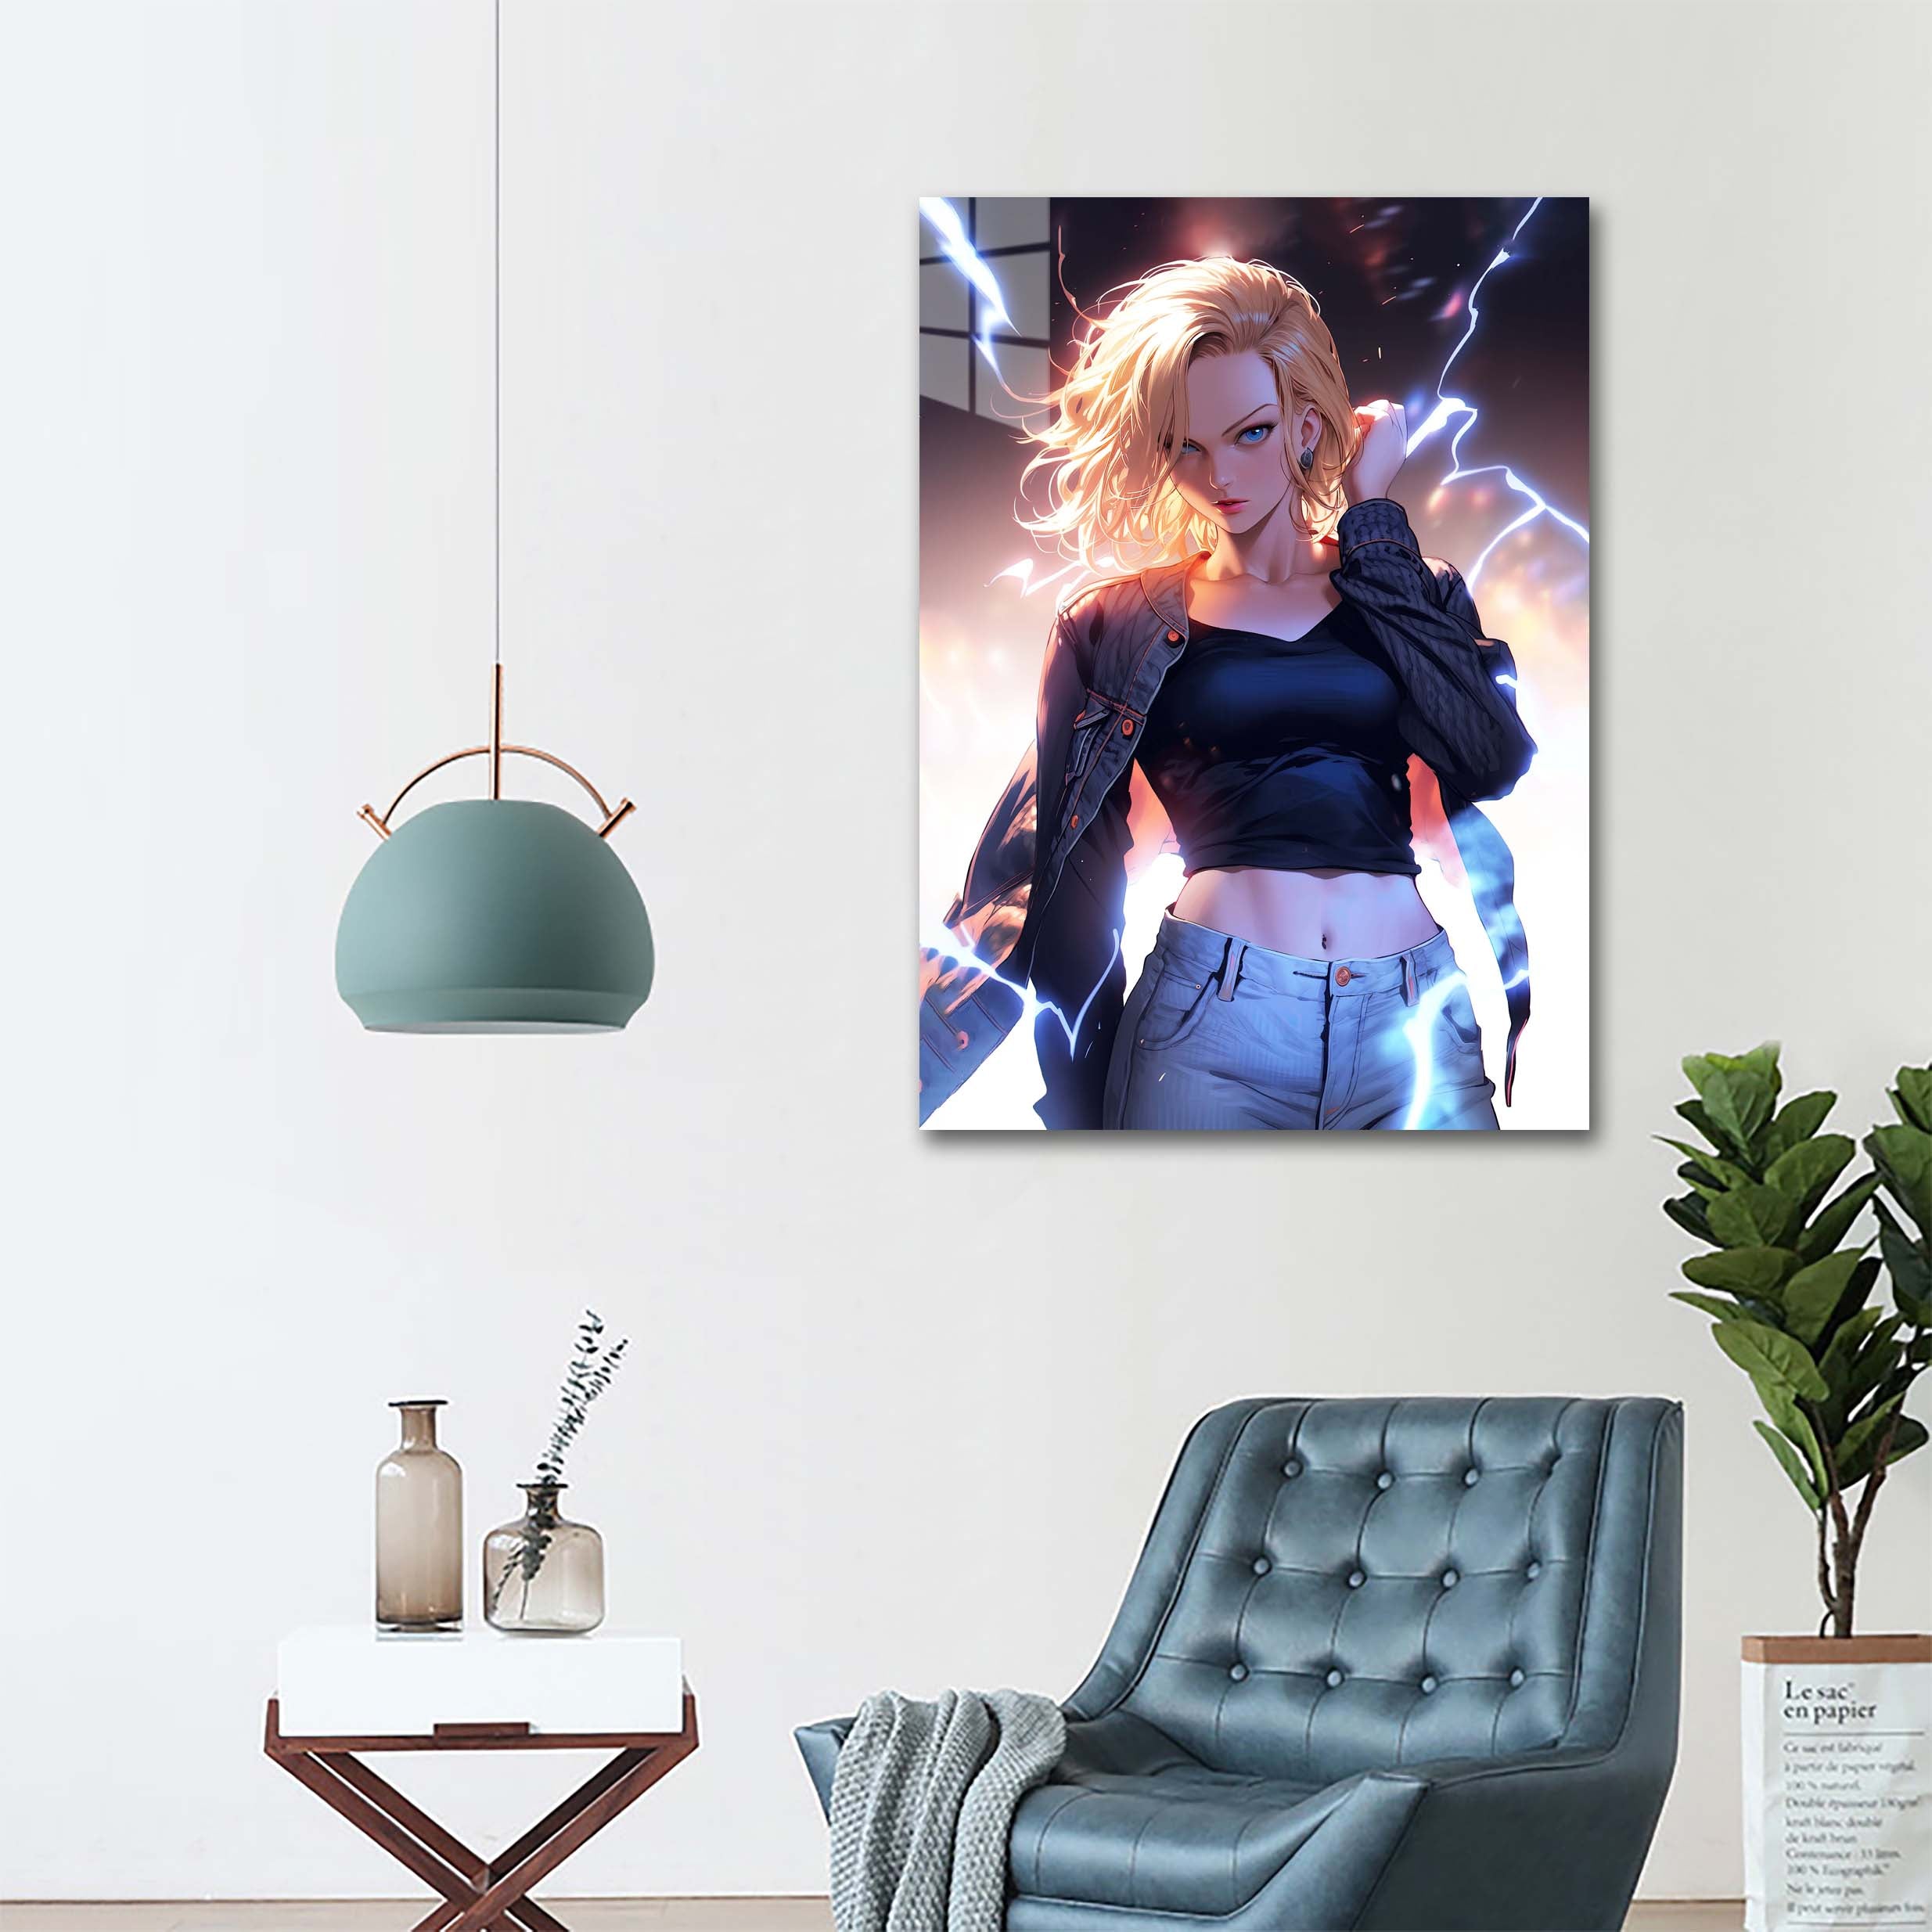 Android 18-designed by @Super Anima